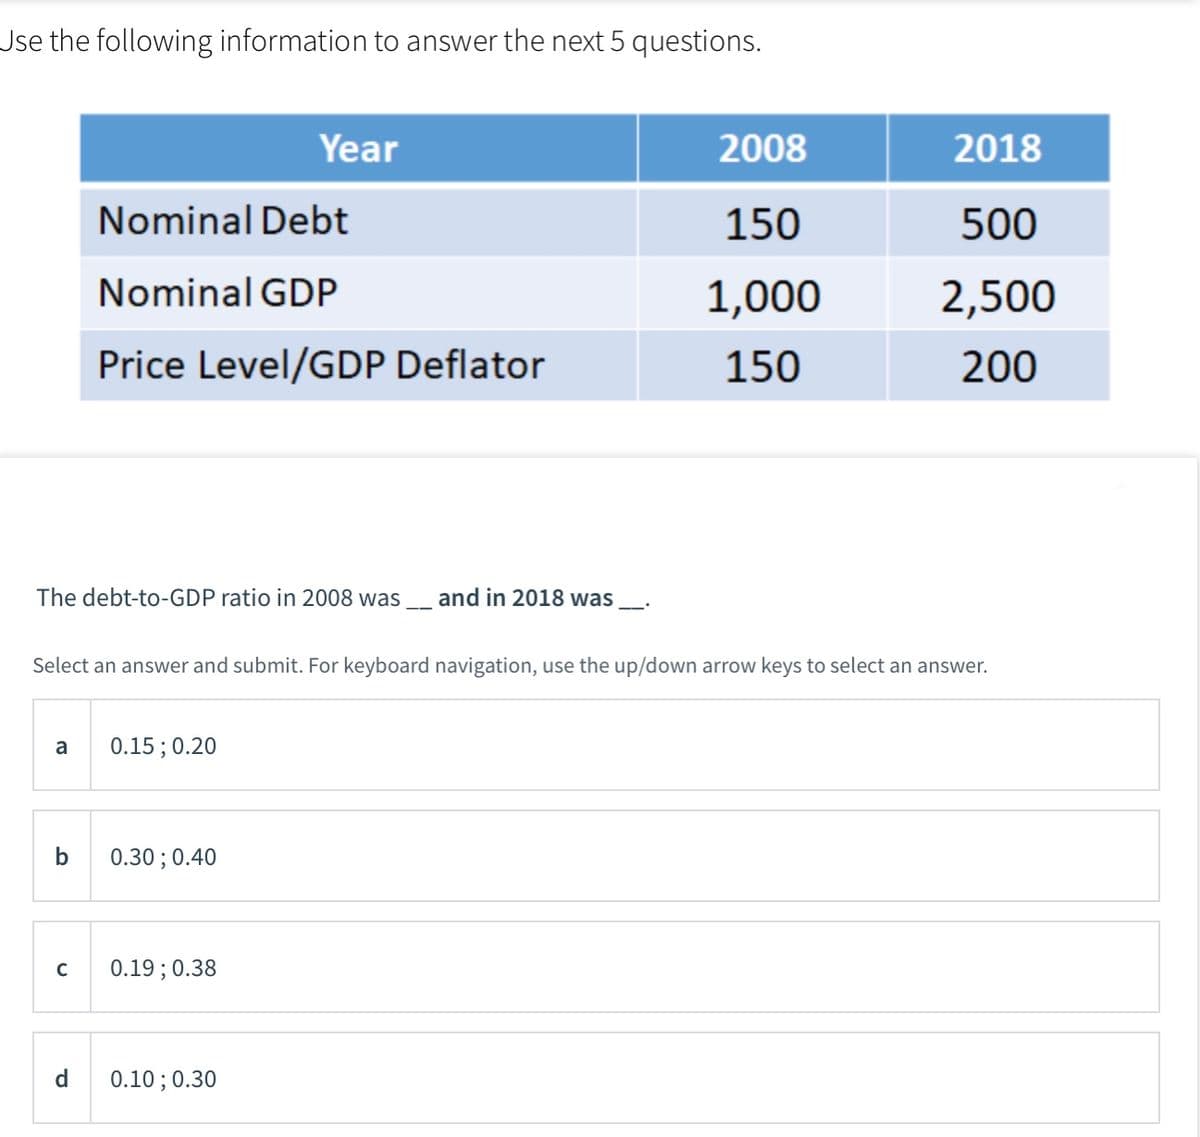 Jse the following information to answer the next 5 questions.
Year
2008
2018
Nominal Debt
150
500
Nominal GDP
1,000
2,500
Price Level/GDP Deflator
150
200
The debt-to-GDP ratio in 2008 was_ and in 2018 was
Select an answer and submit. For keyboard navigation, use the up/down arrow keys to select an answer.
0.15 ; 0.20
a
b
0.30 ; 0.40
0.19; 0.38
d
0.10 ; 0.30
